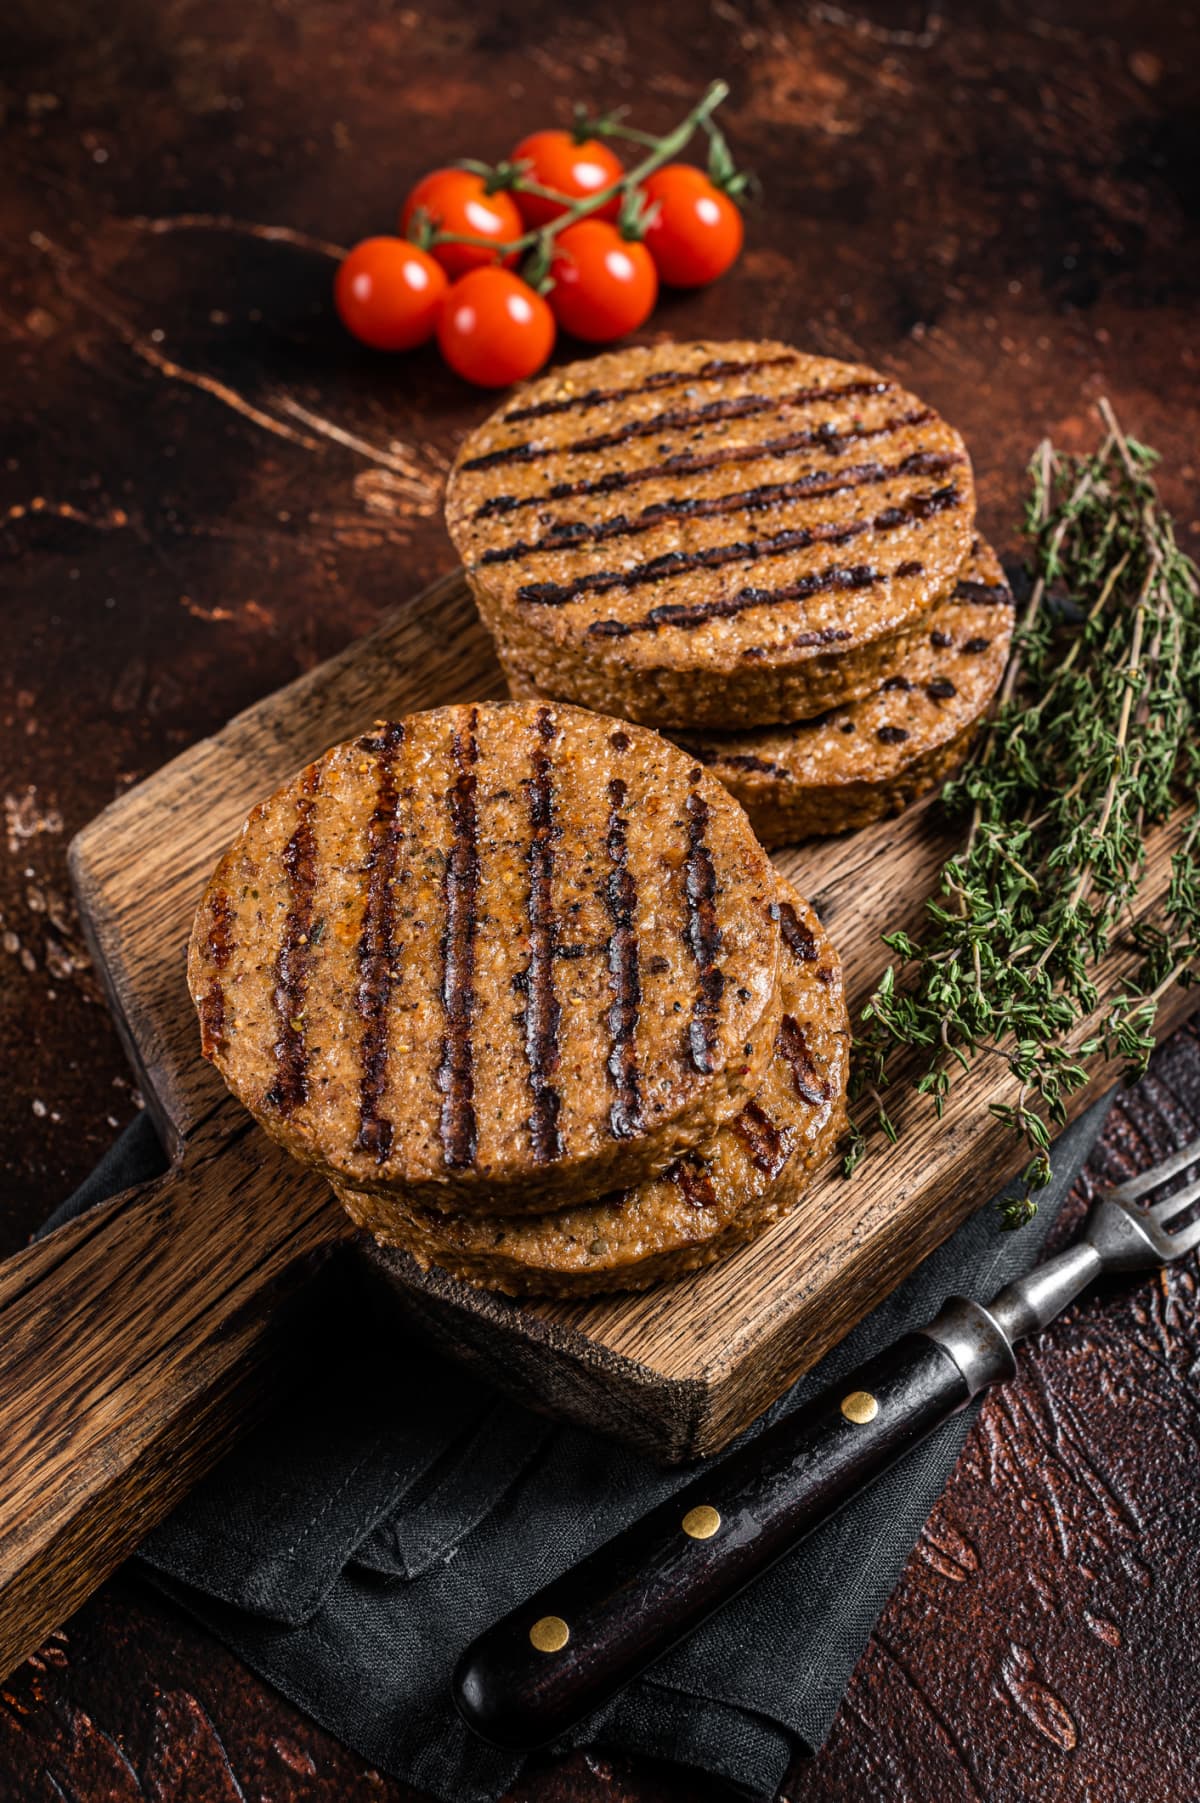 BBQ Grilled plant based meat burger patties,  vegan cutlets on wooden board with herbs. Dark background. Top view.